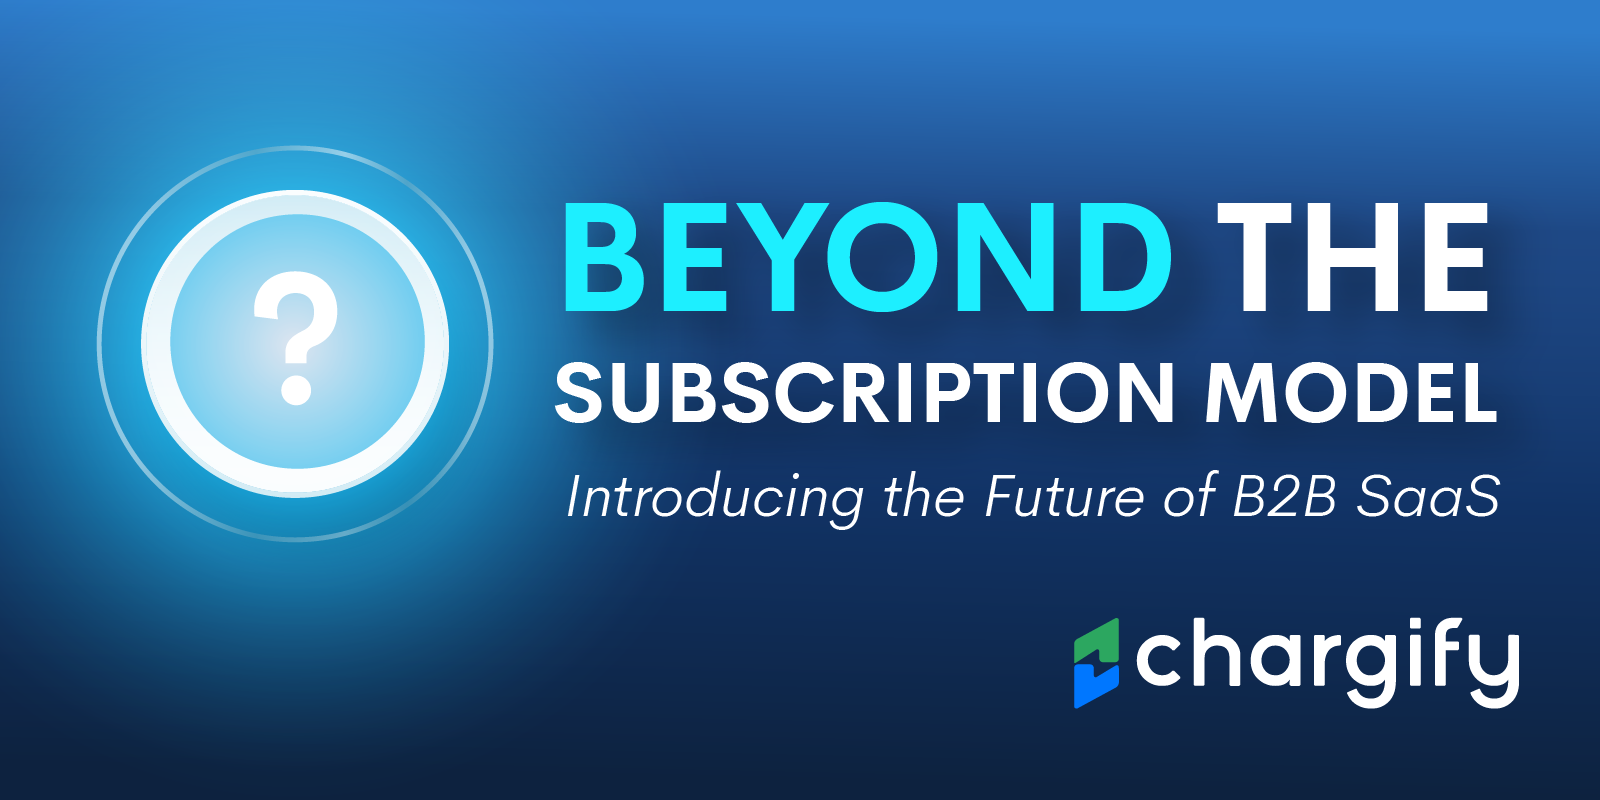 Beyond the Subscription Model: Introducing the Future of B2B SaaS Billing